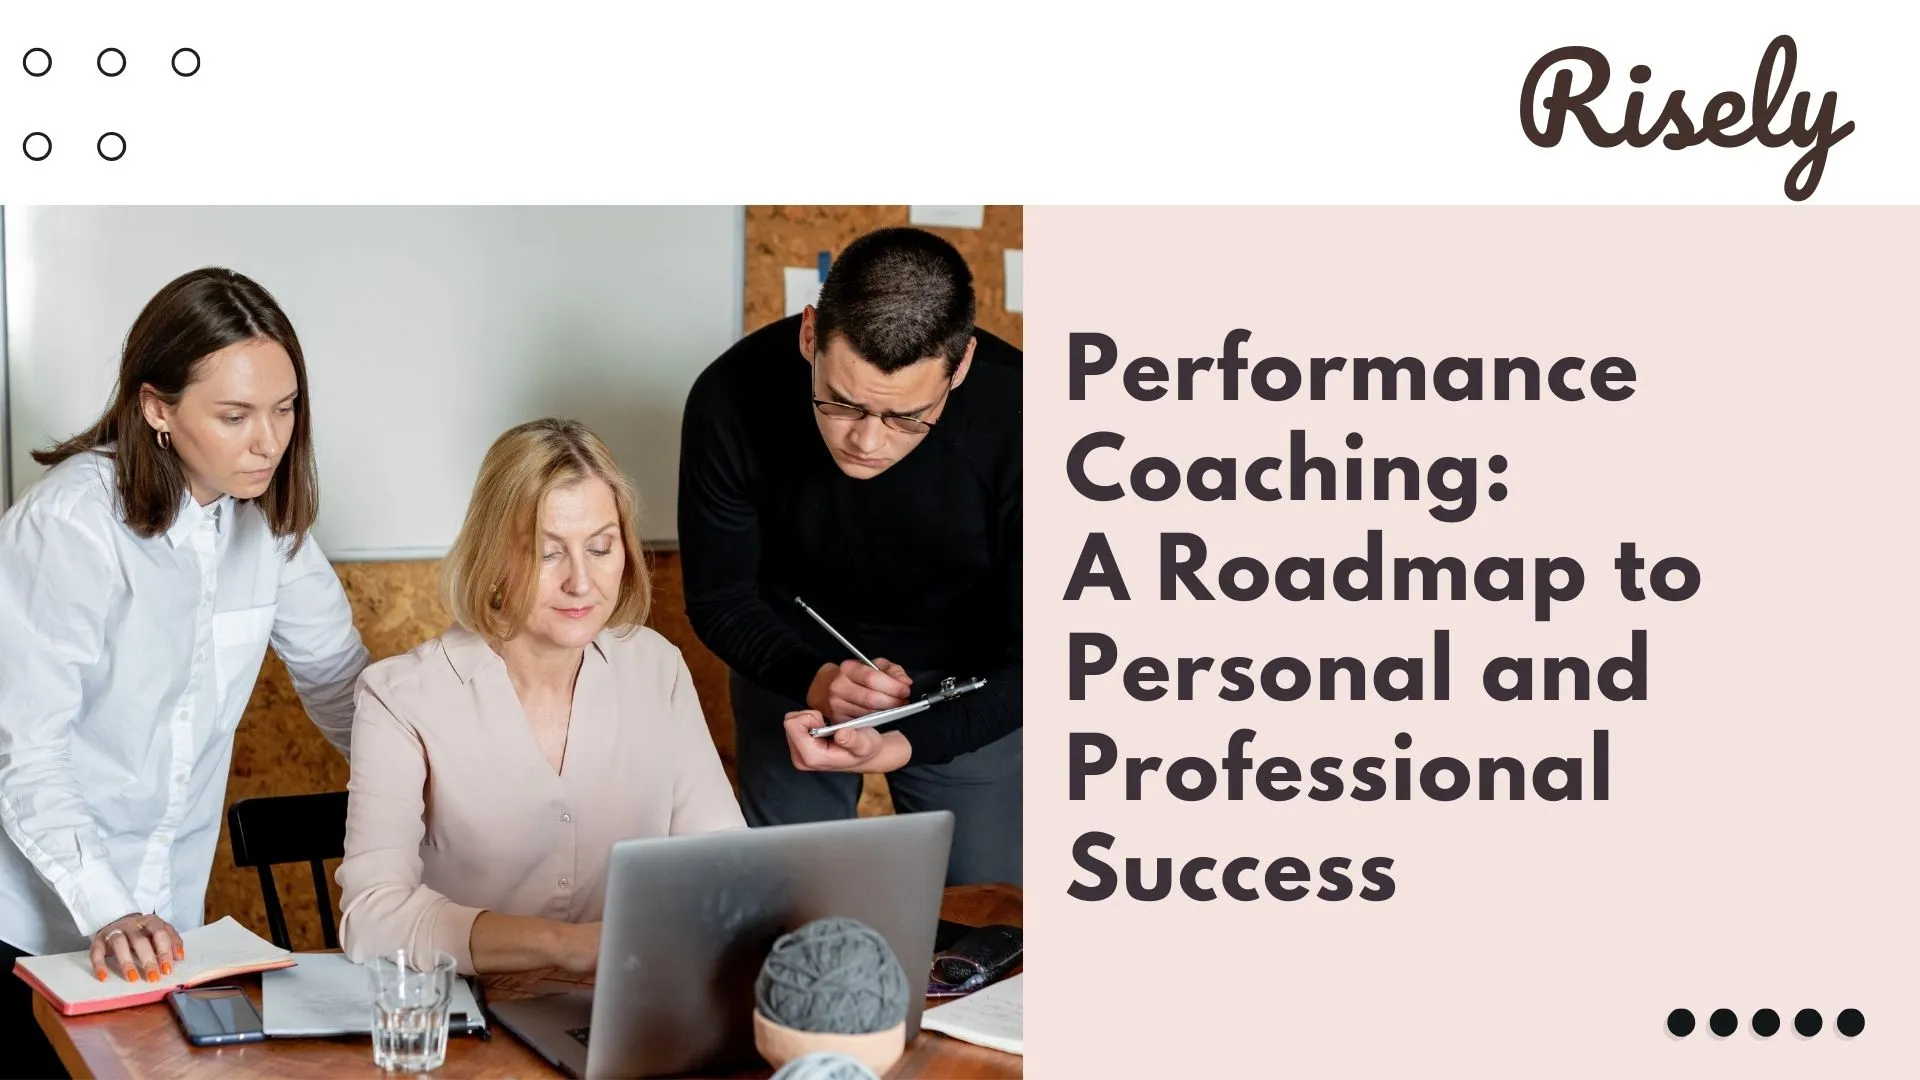 Performance Coaching: A Roadmap to Personal and Professional Success